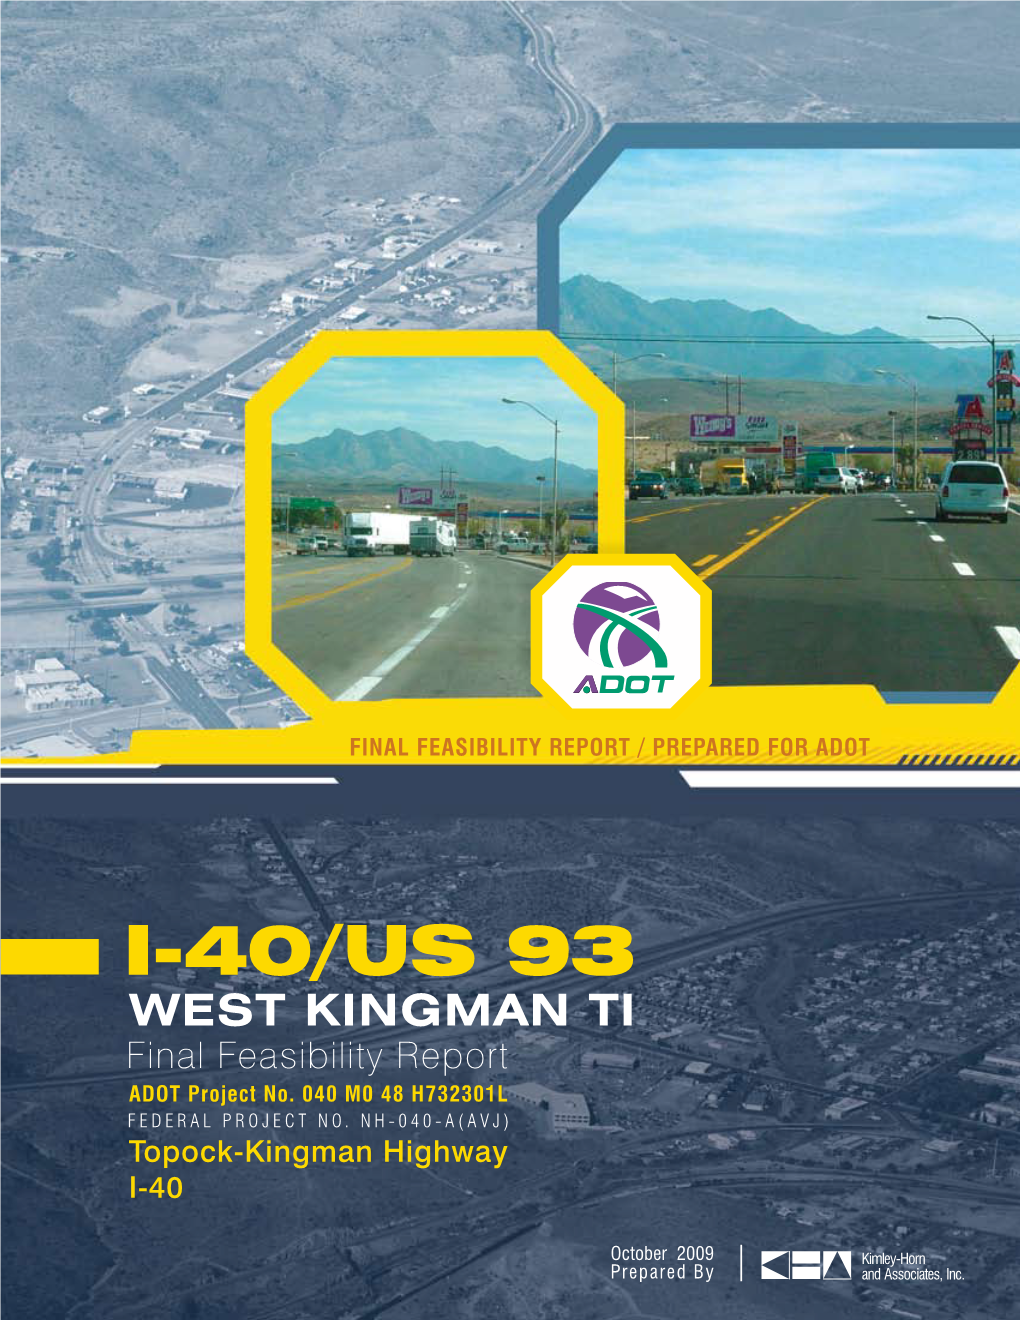 FINAL Feasibility Report / Prepared for ADOT